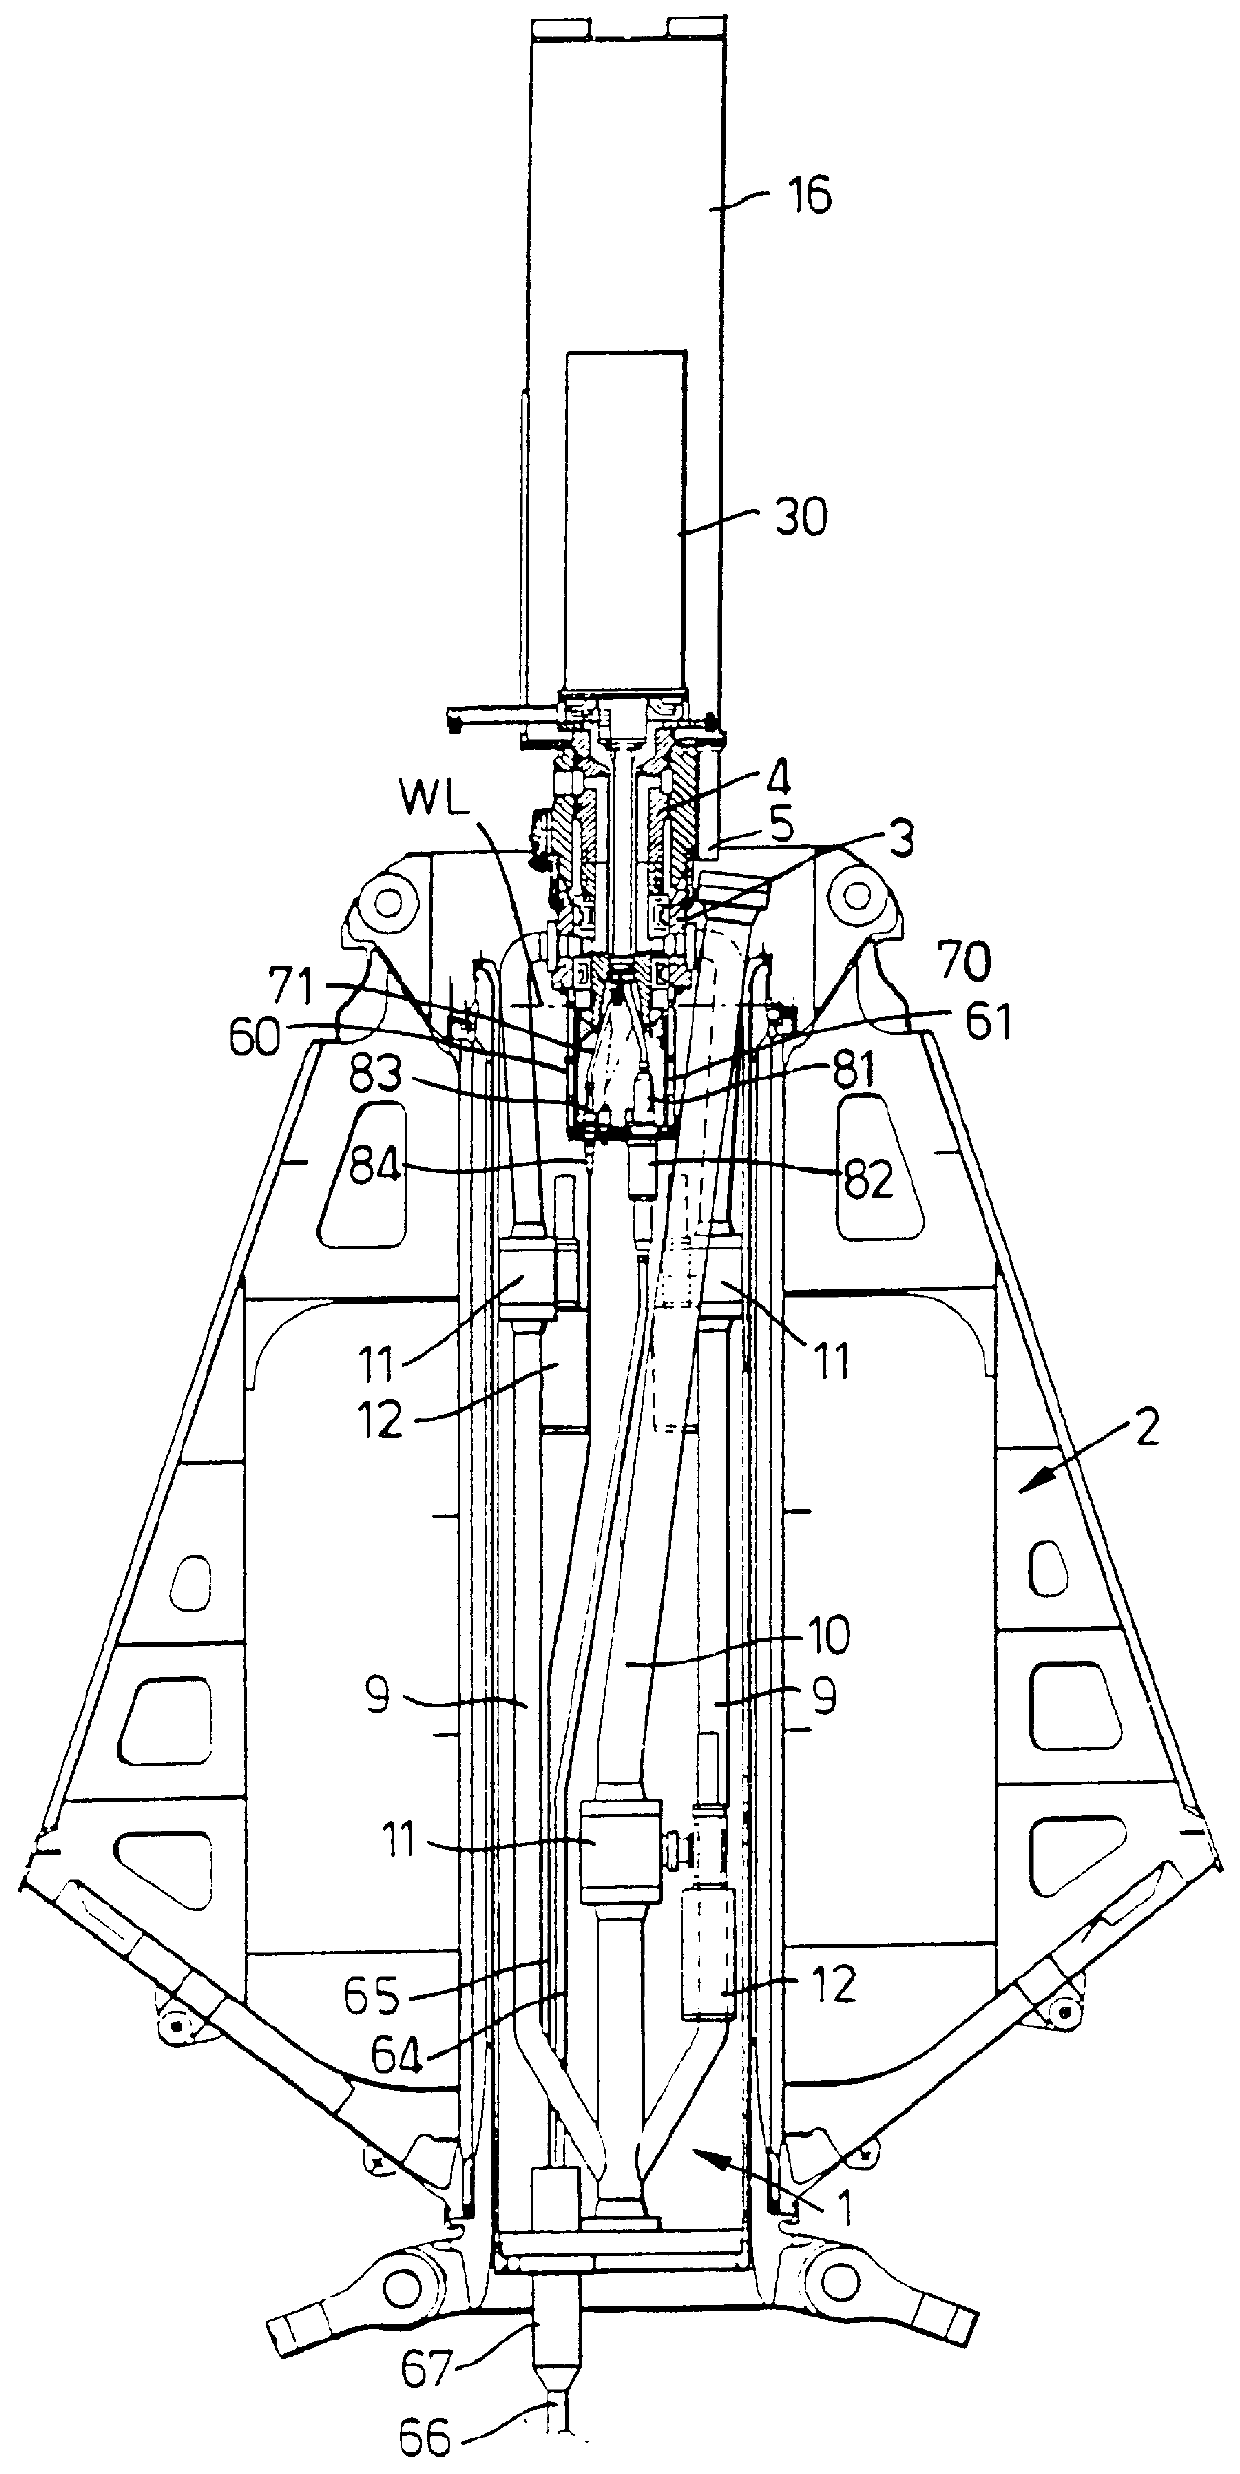 Rotating connector for operative connection between a buoy and a floating vessel for the production of hydrocarbons